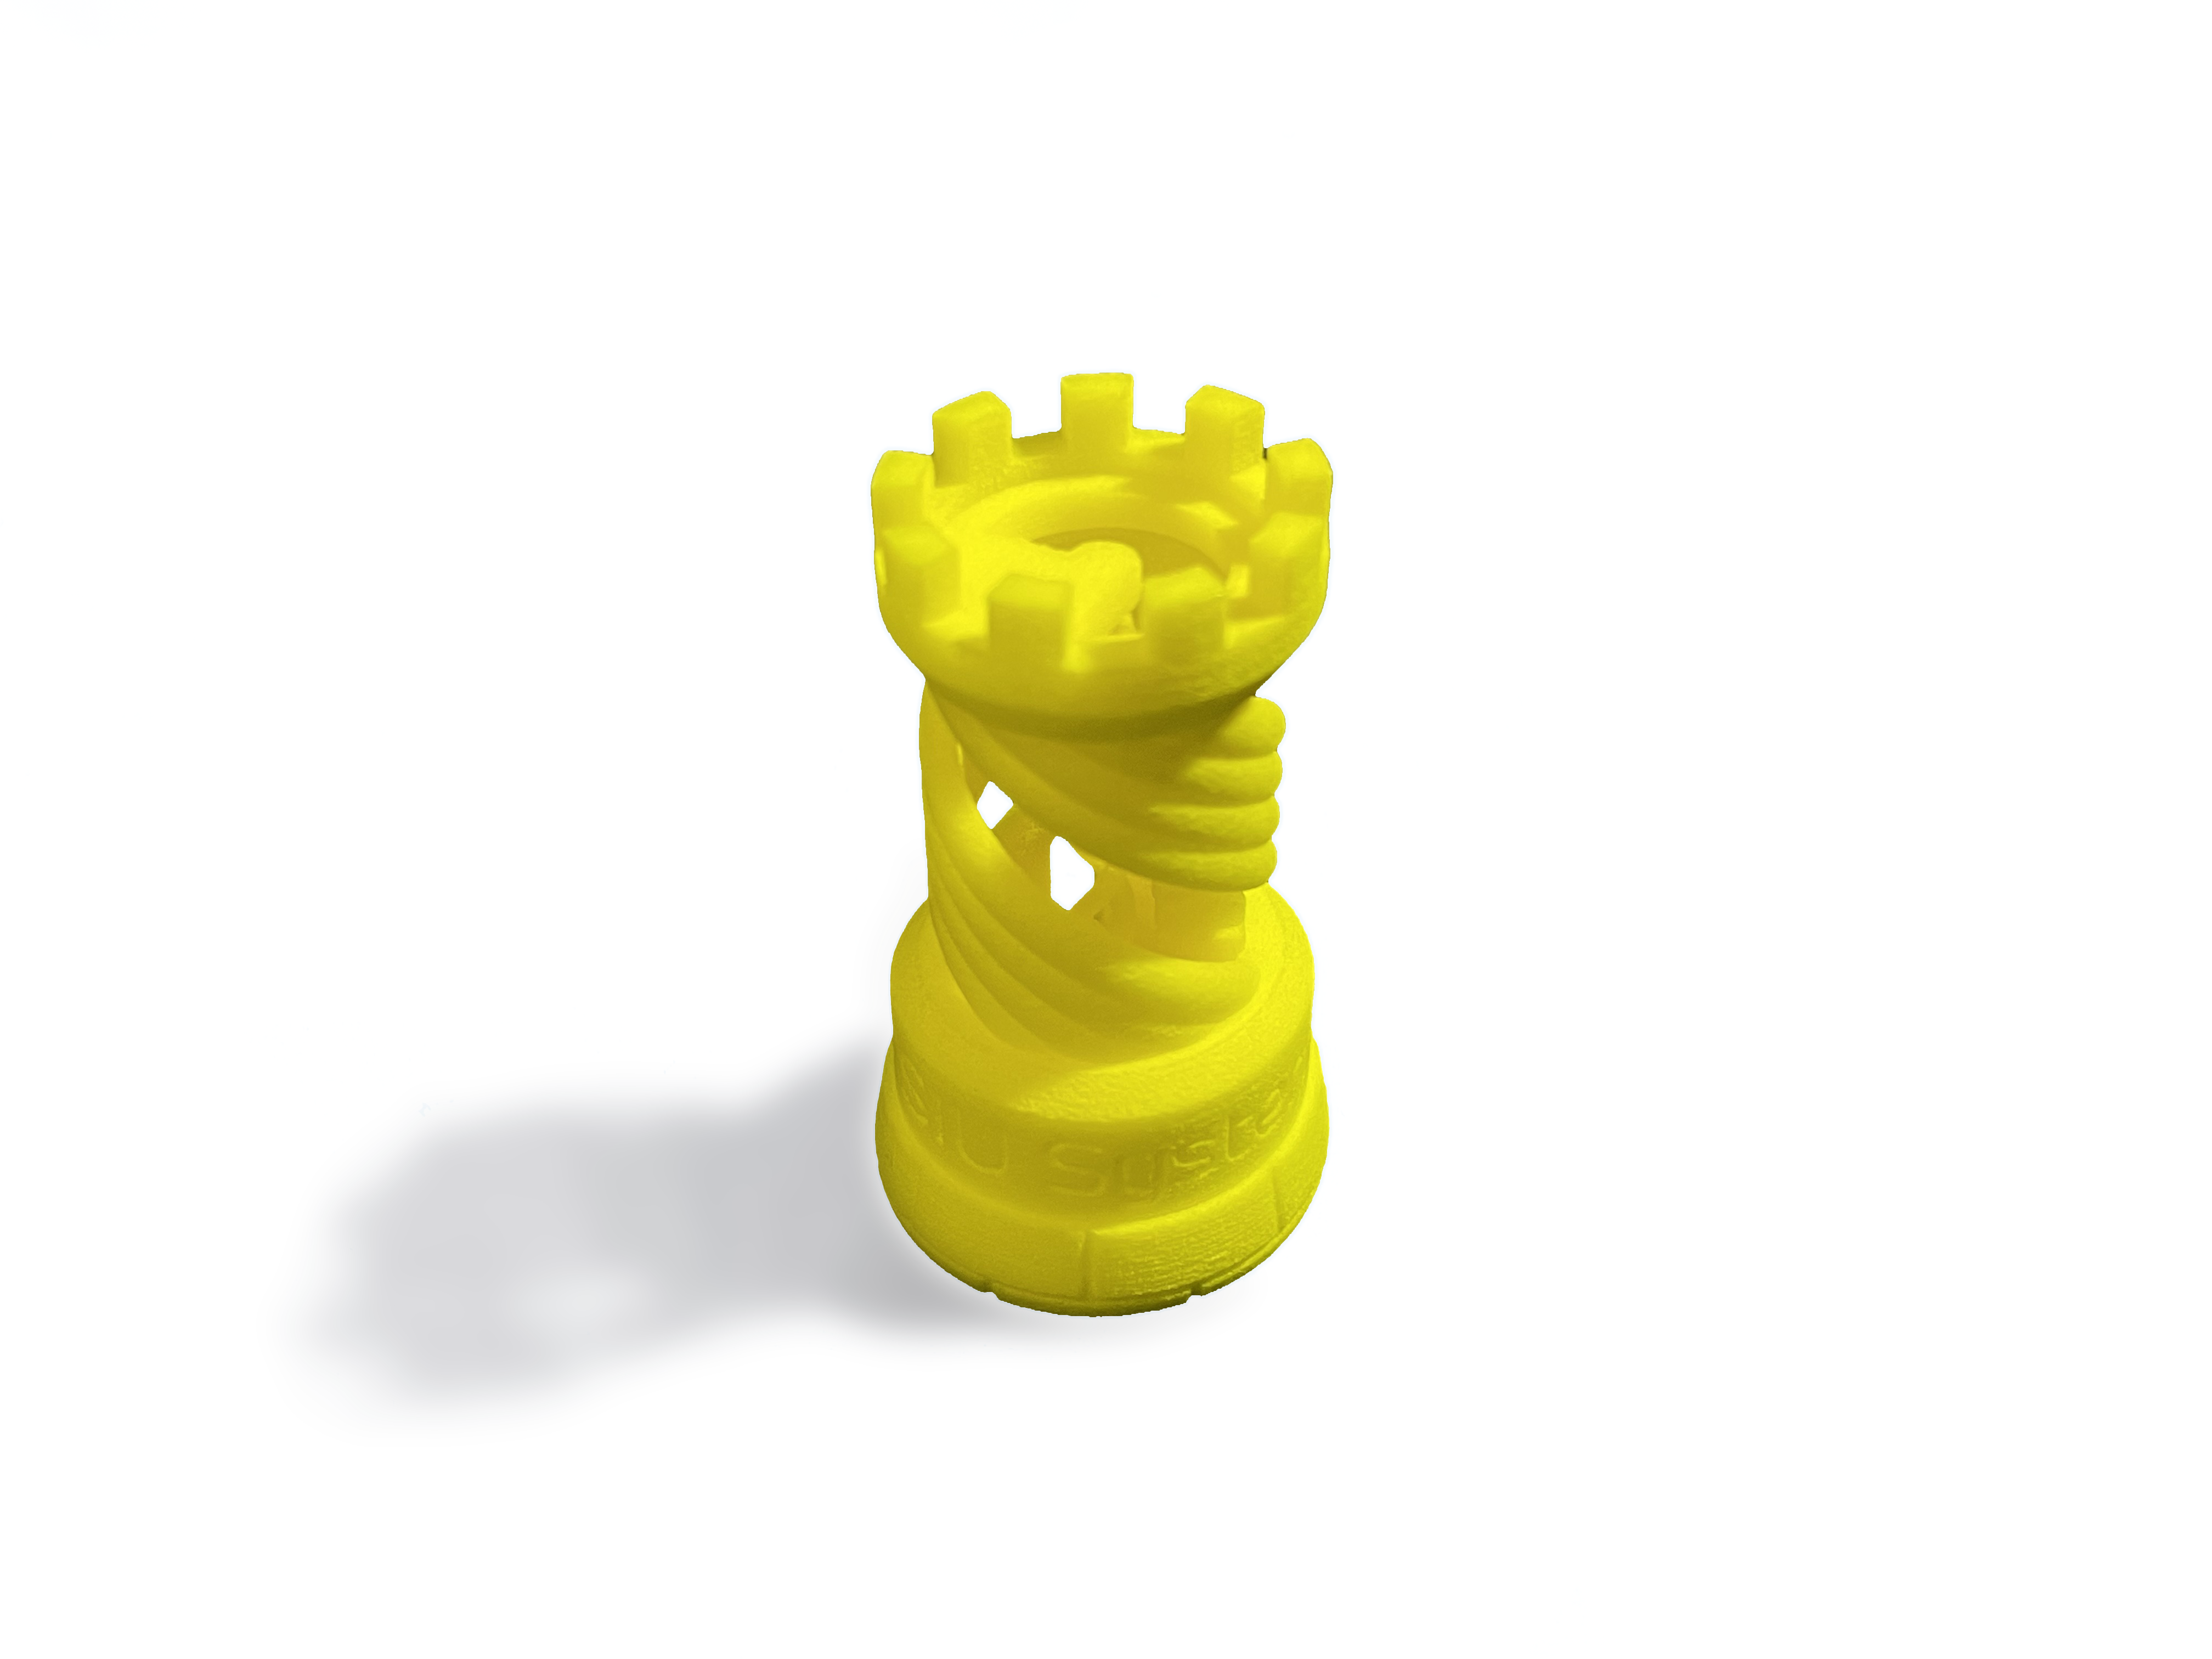 Statuette "Yellow Tower"